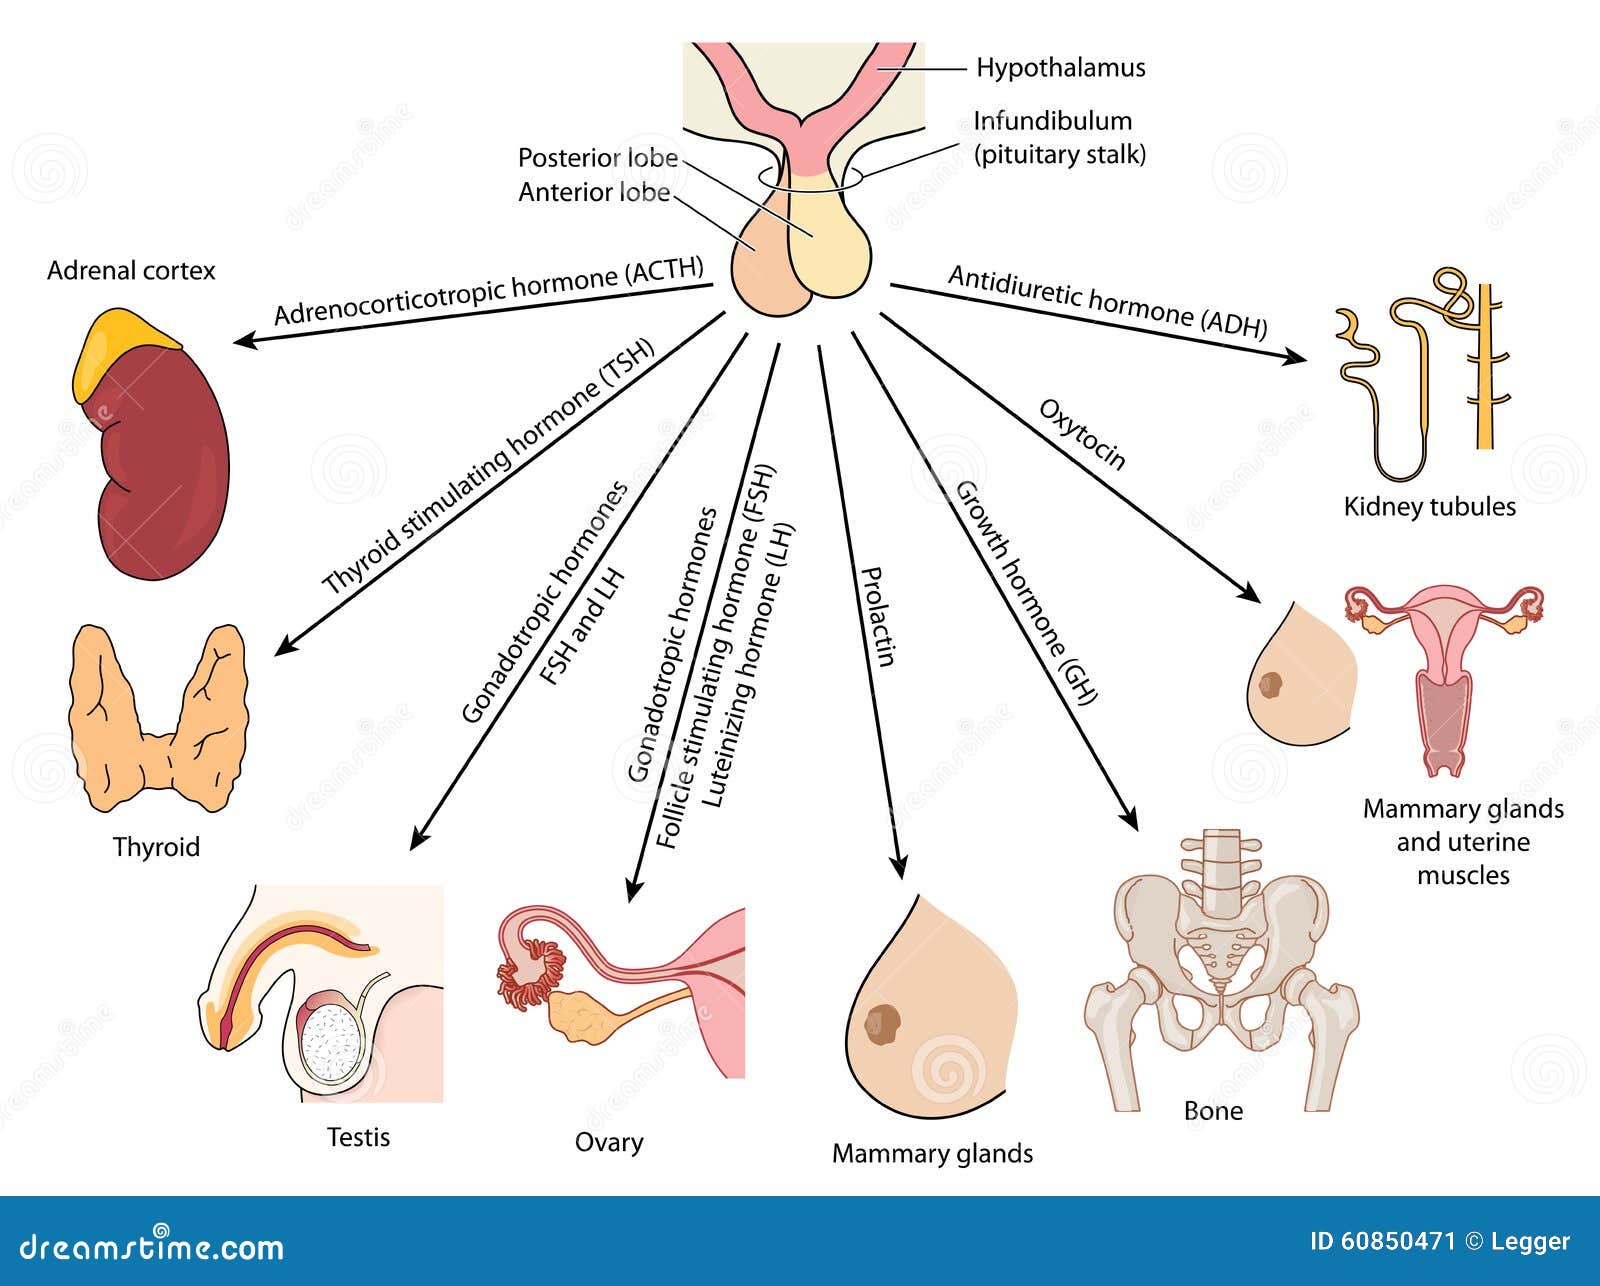 organs affected by pituitary hormones